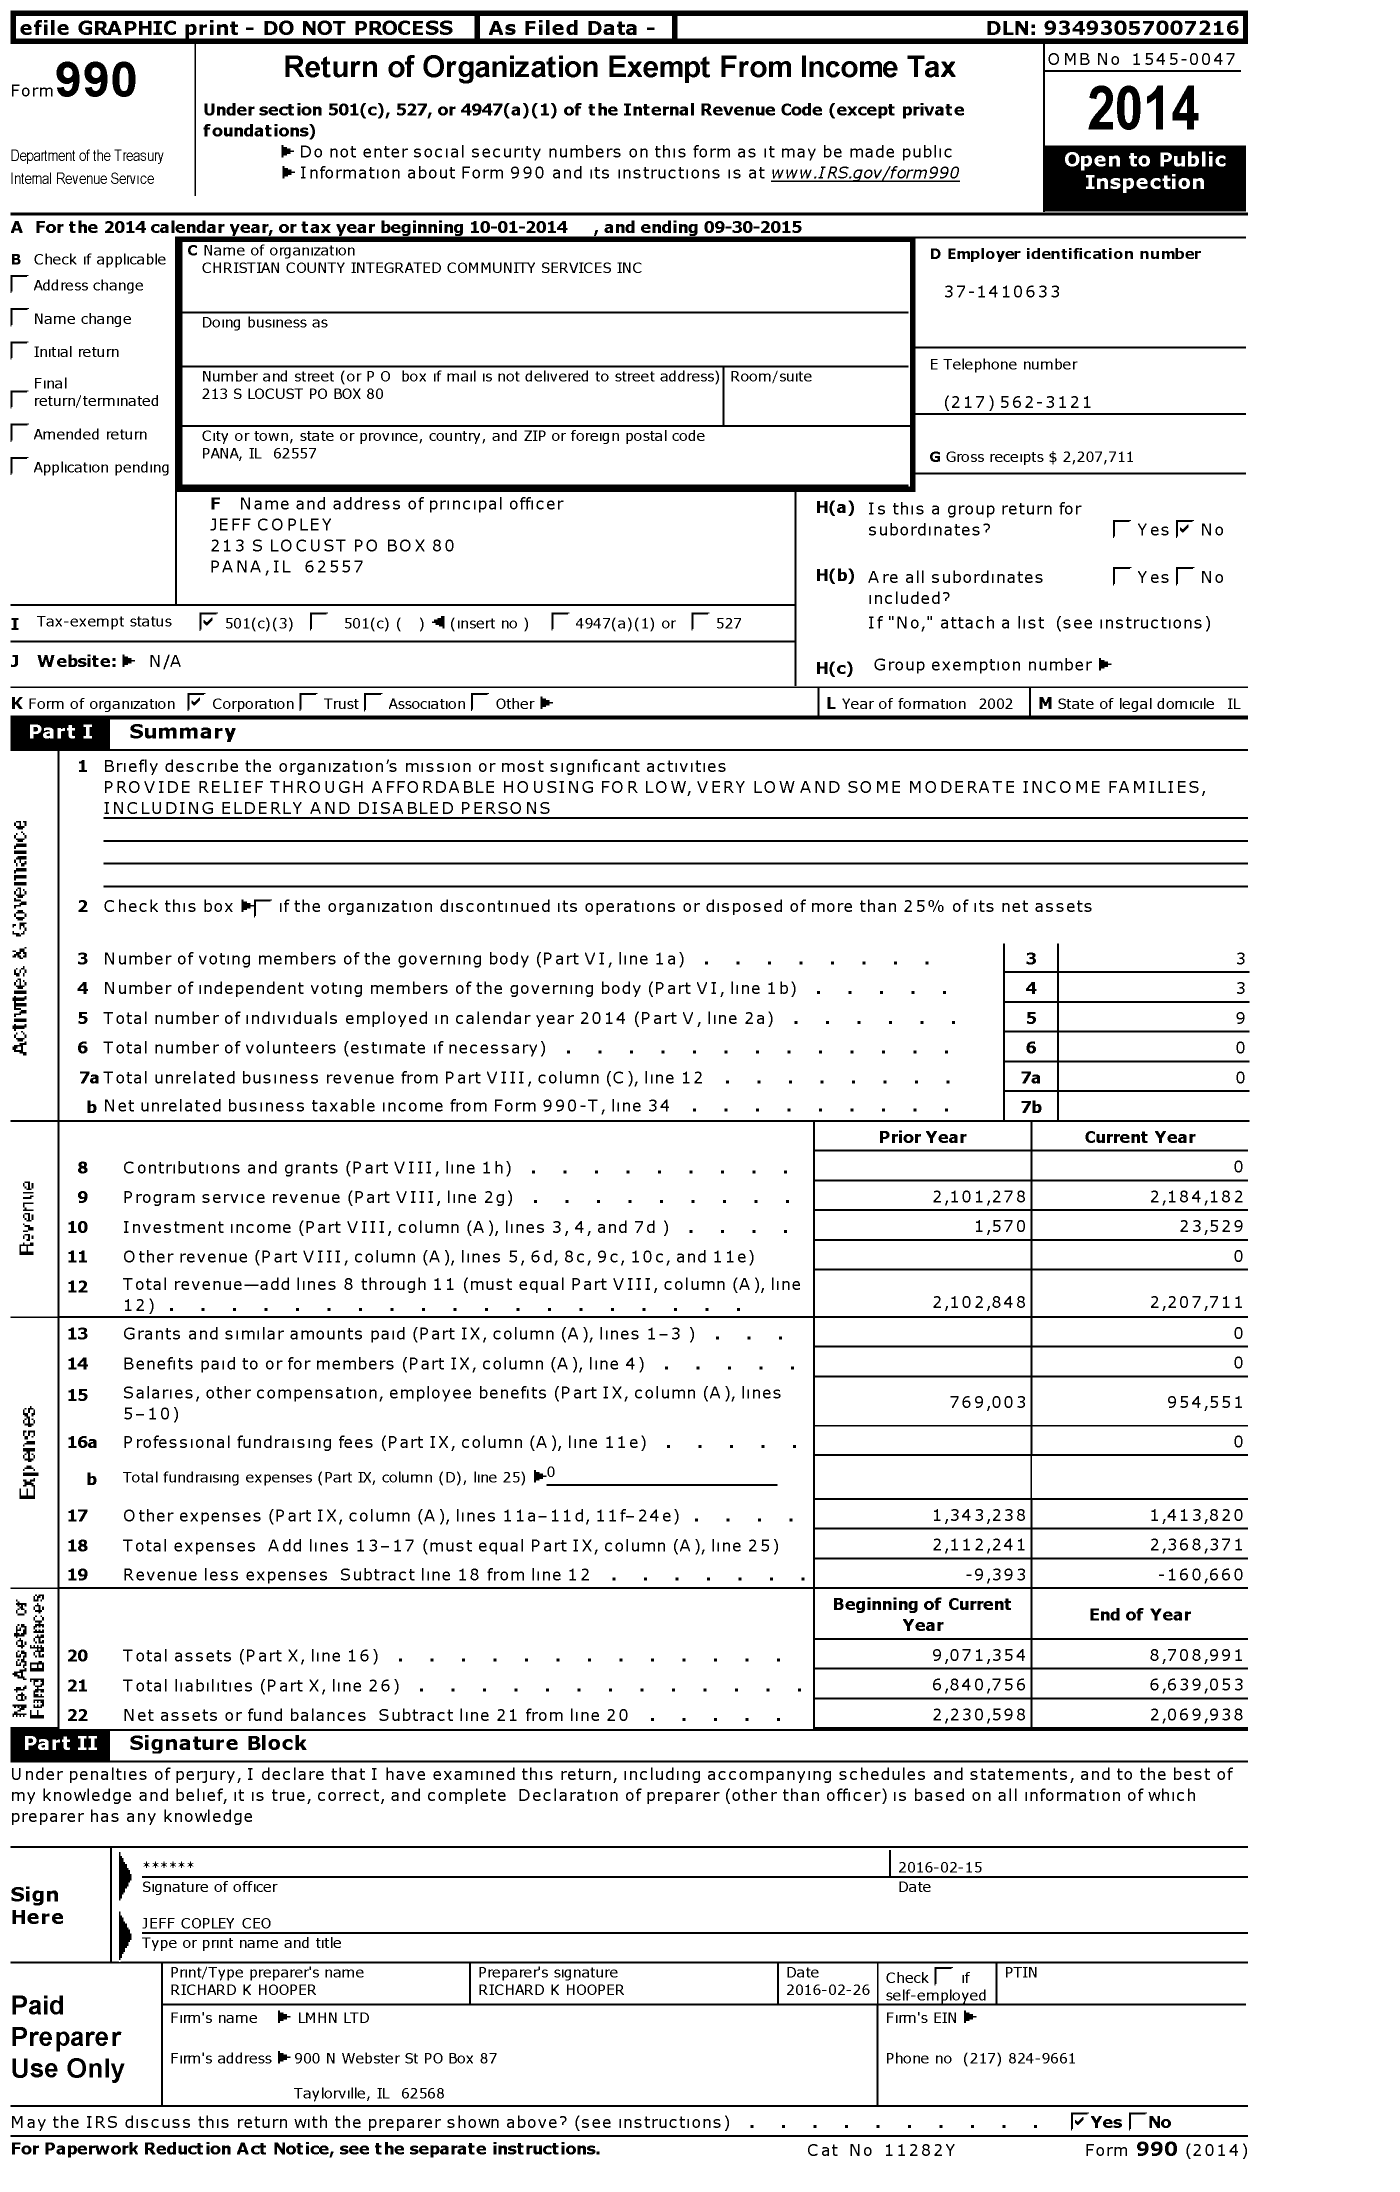 Image of first page of 2014 Form 990 for Christian County Integrated Community Services